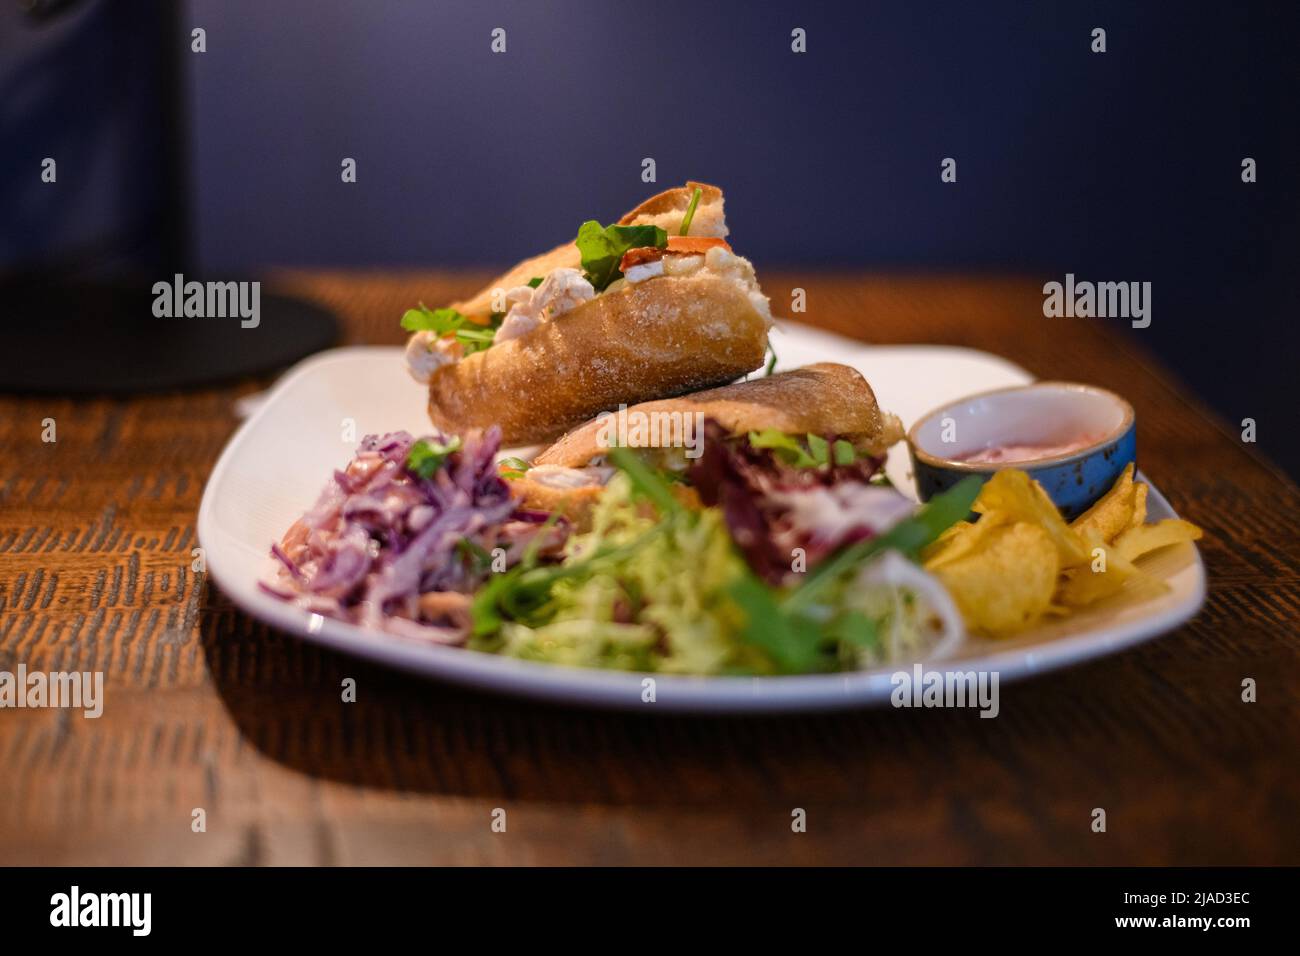 Close-up of chicken, brie and salad sandwiches with coleslaw, green salad and crisps Stock Photo